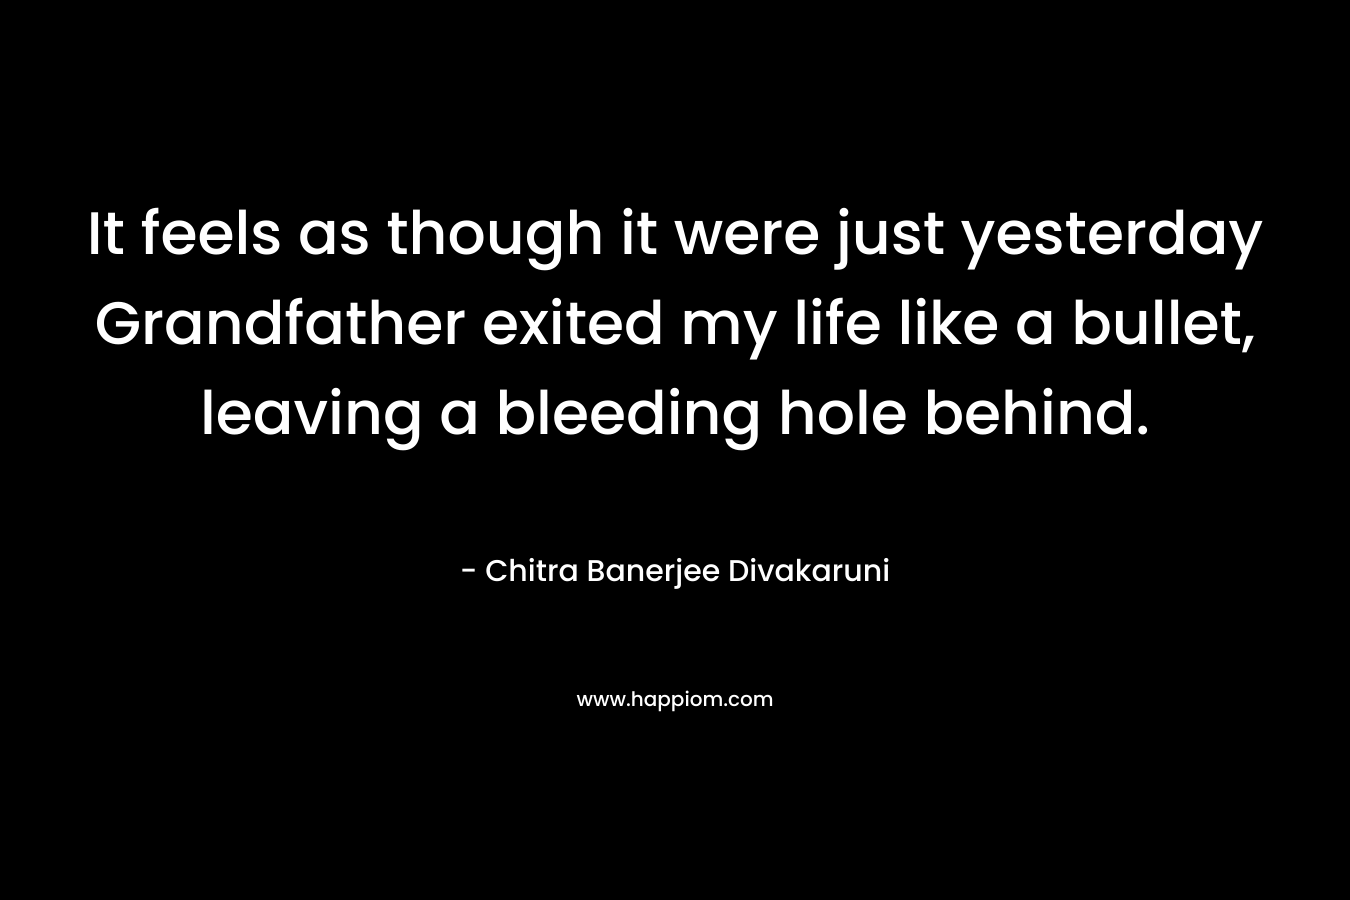 It feels as though it were just yesterday Grandfather exited my life like a bullet, leaving a bleeding hole behind. – Chitra Banerjee Divakaruni